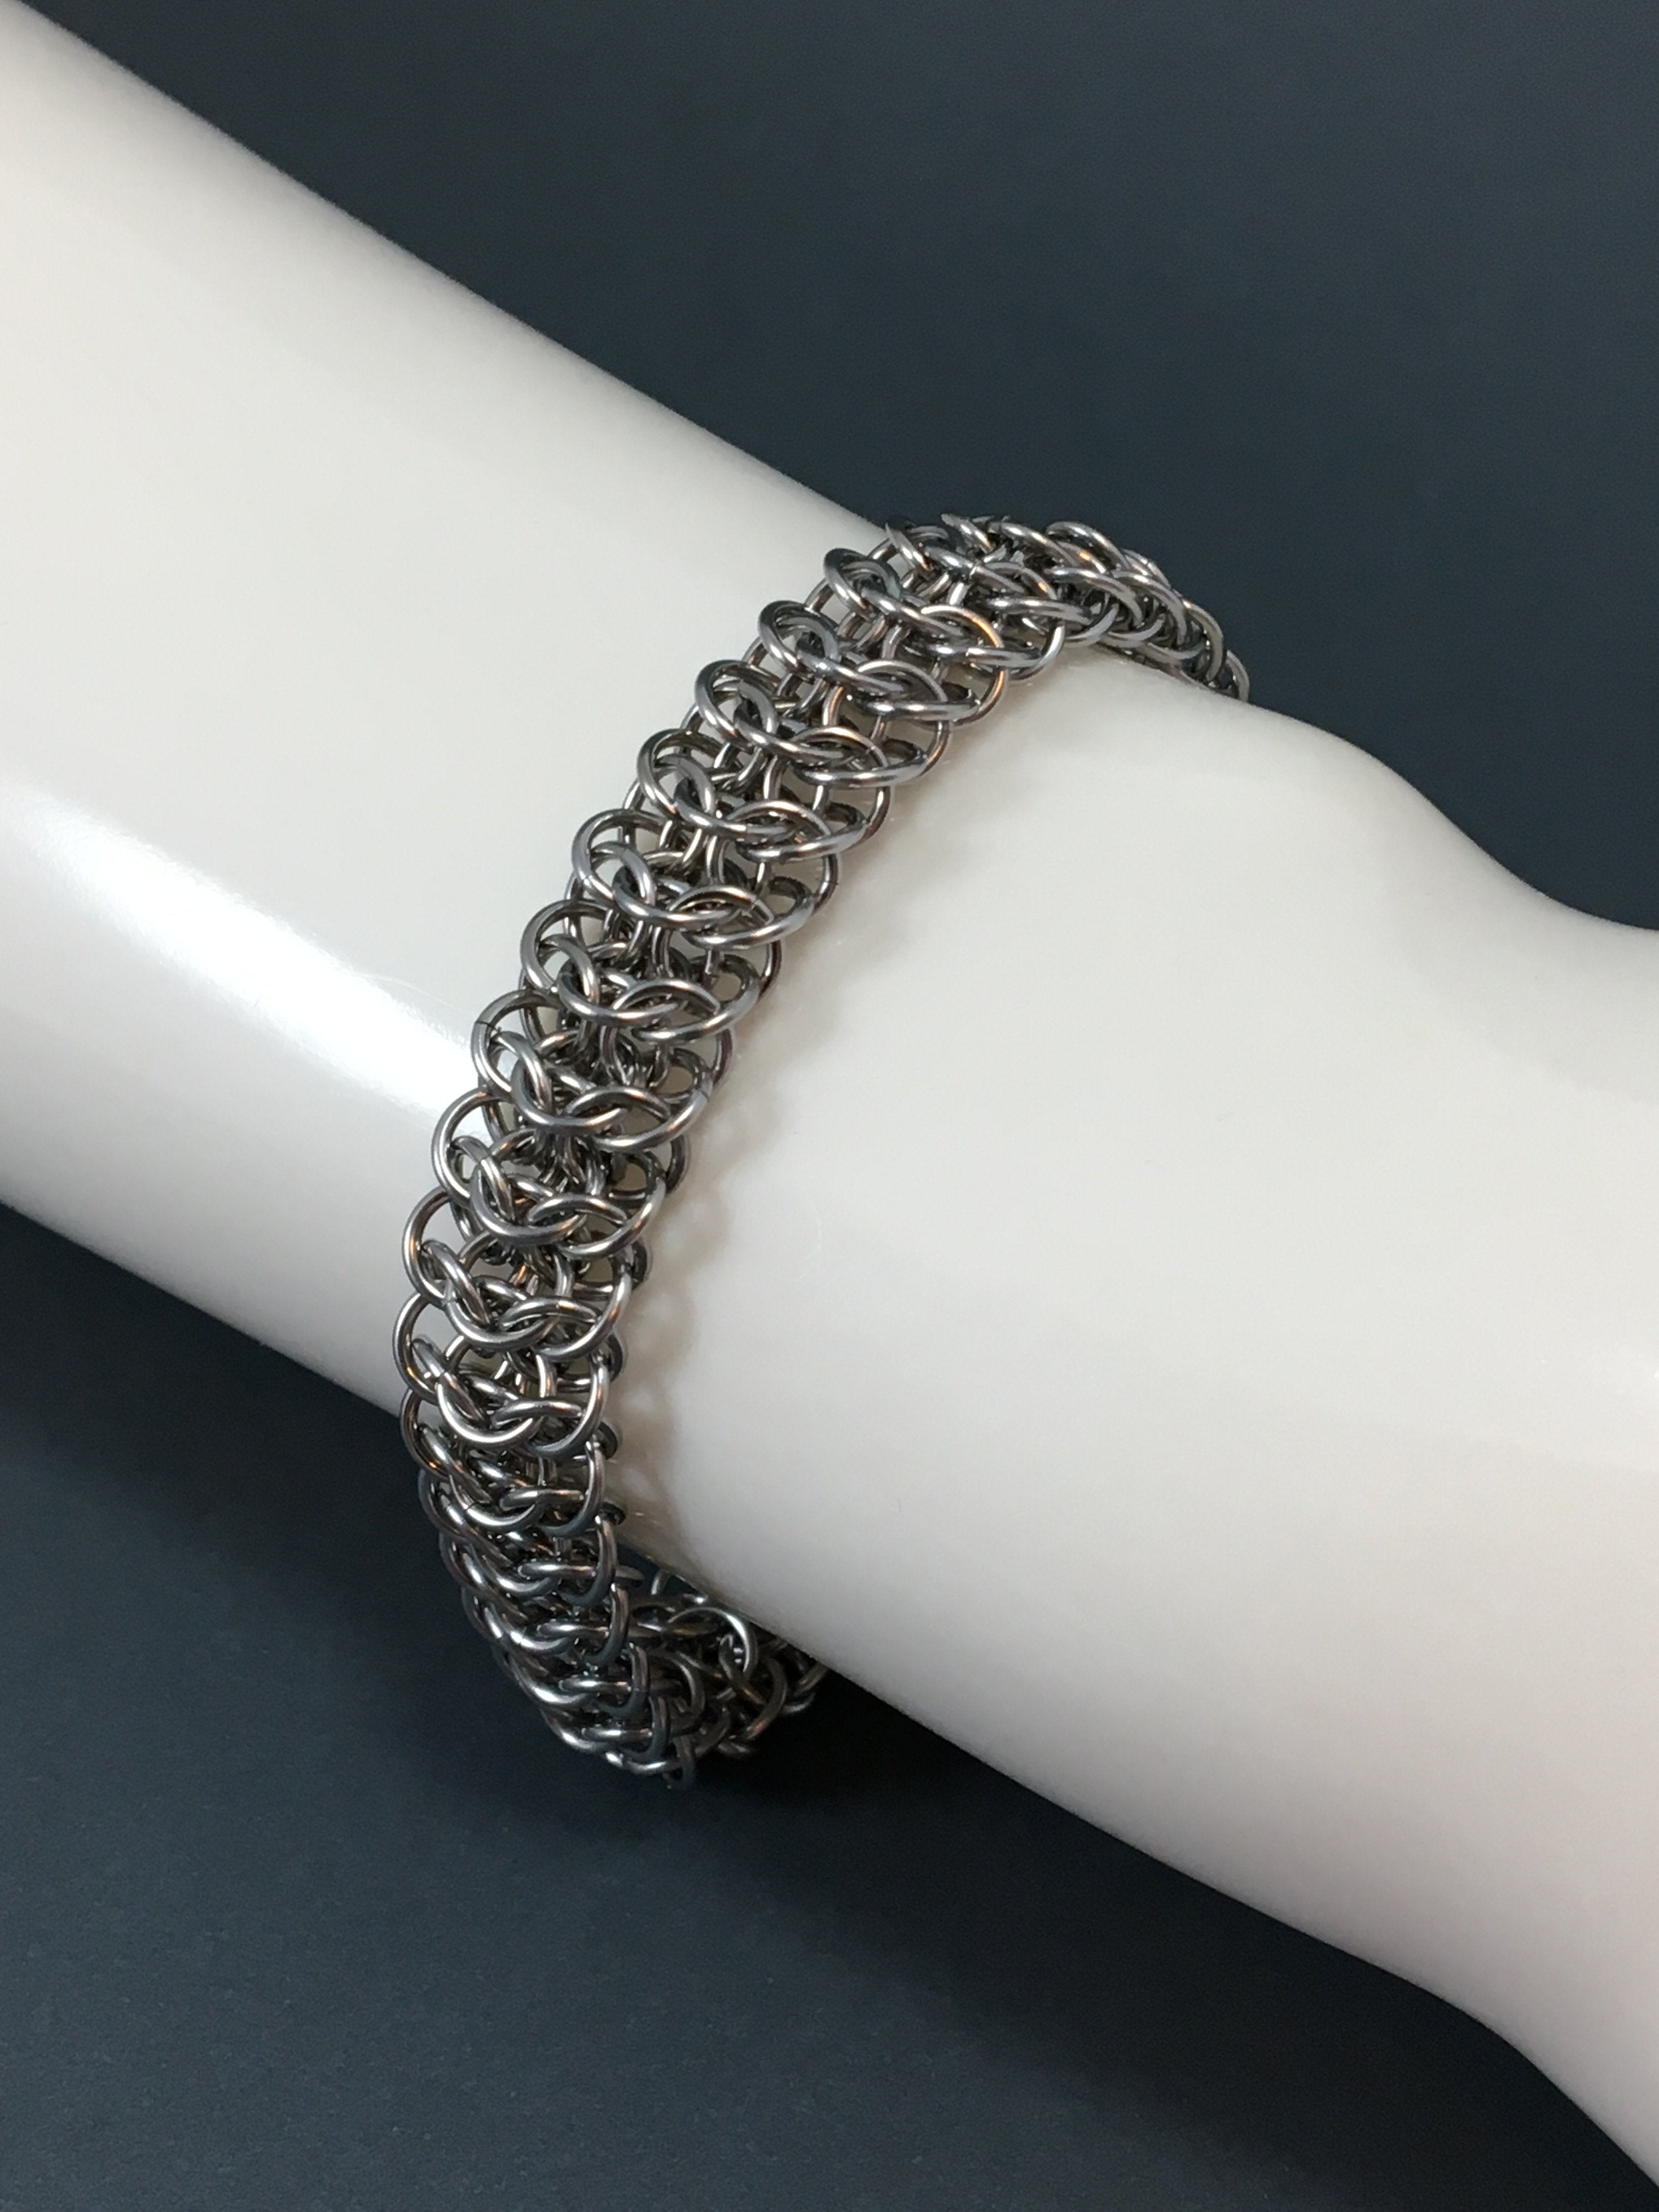 Woven Bracelet With Many Uses – Schacht Spindle Company